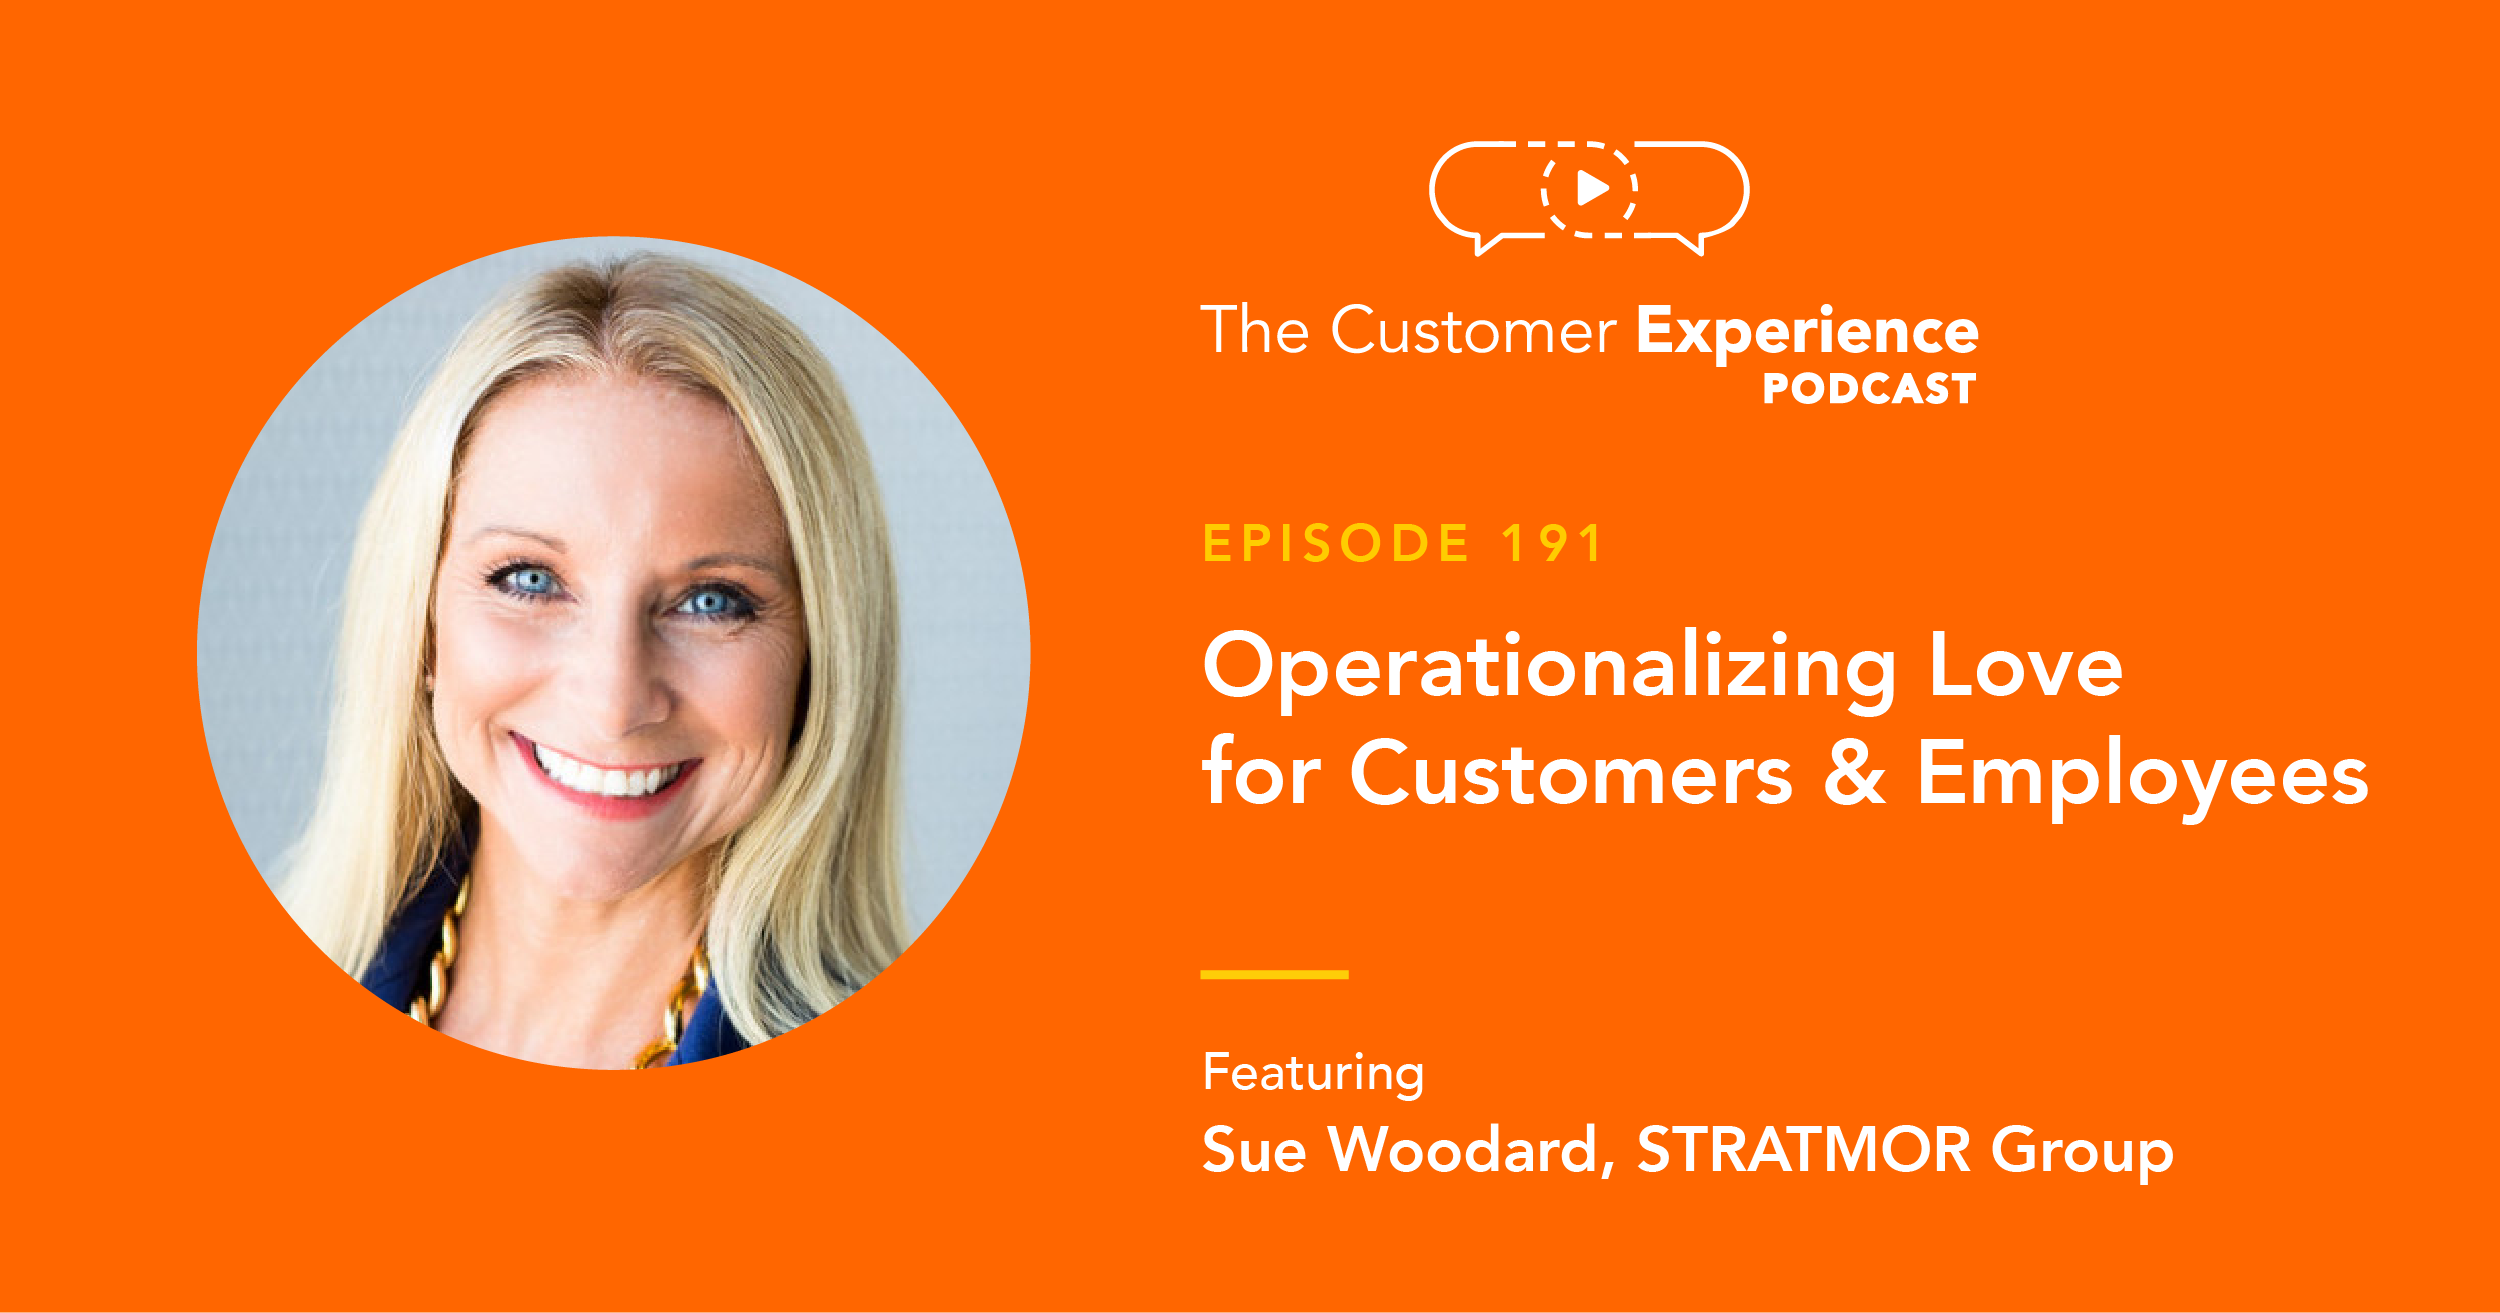 Sue Woodard, mortgage, fintech, Total Expert, BombBomb, The Customer Experience Podcast, operationalizing love, love as a competitive advantage, love your customers, customer experience, love your employees, employee experience